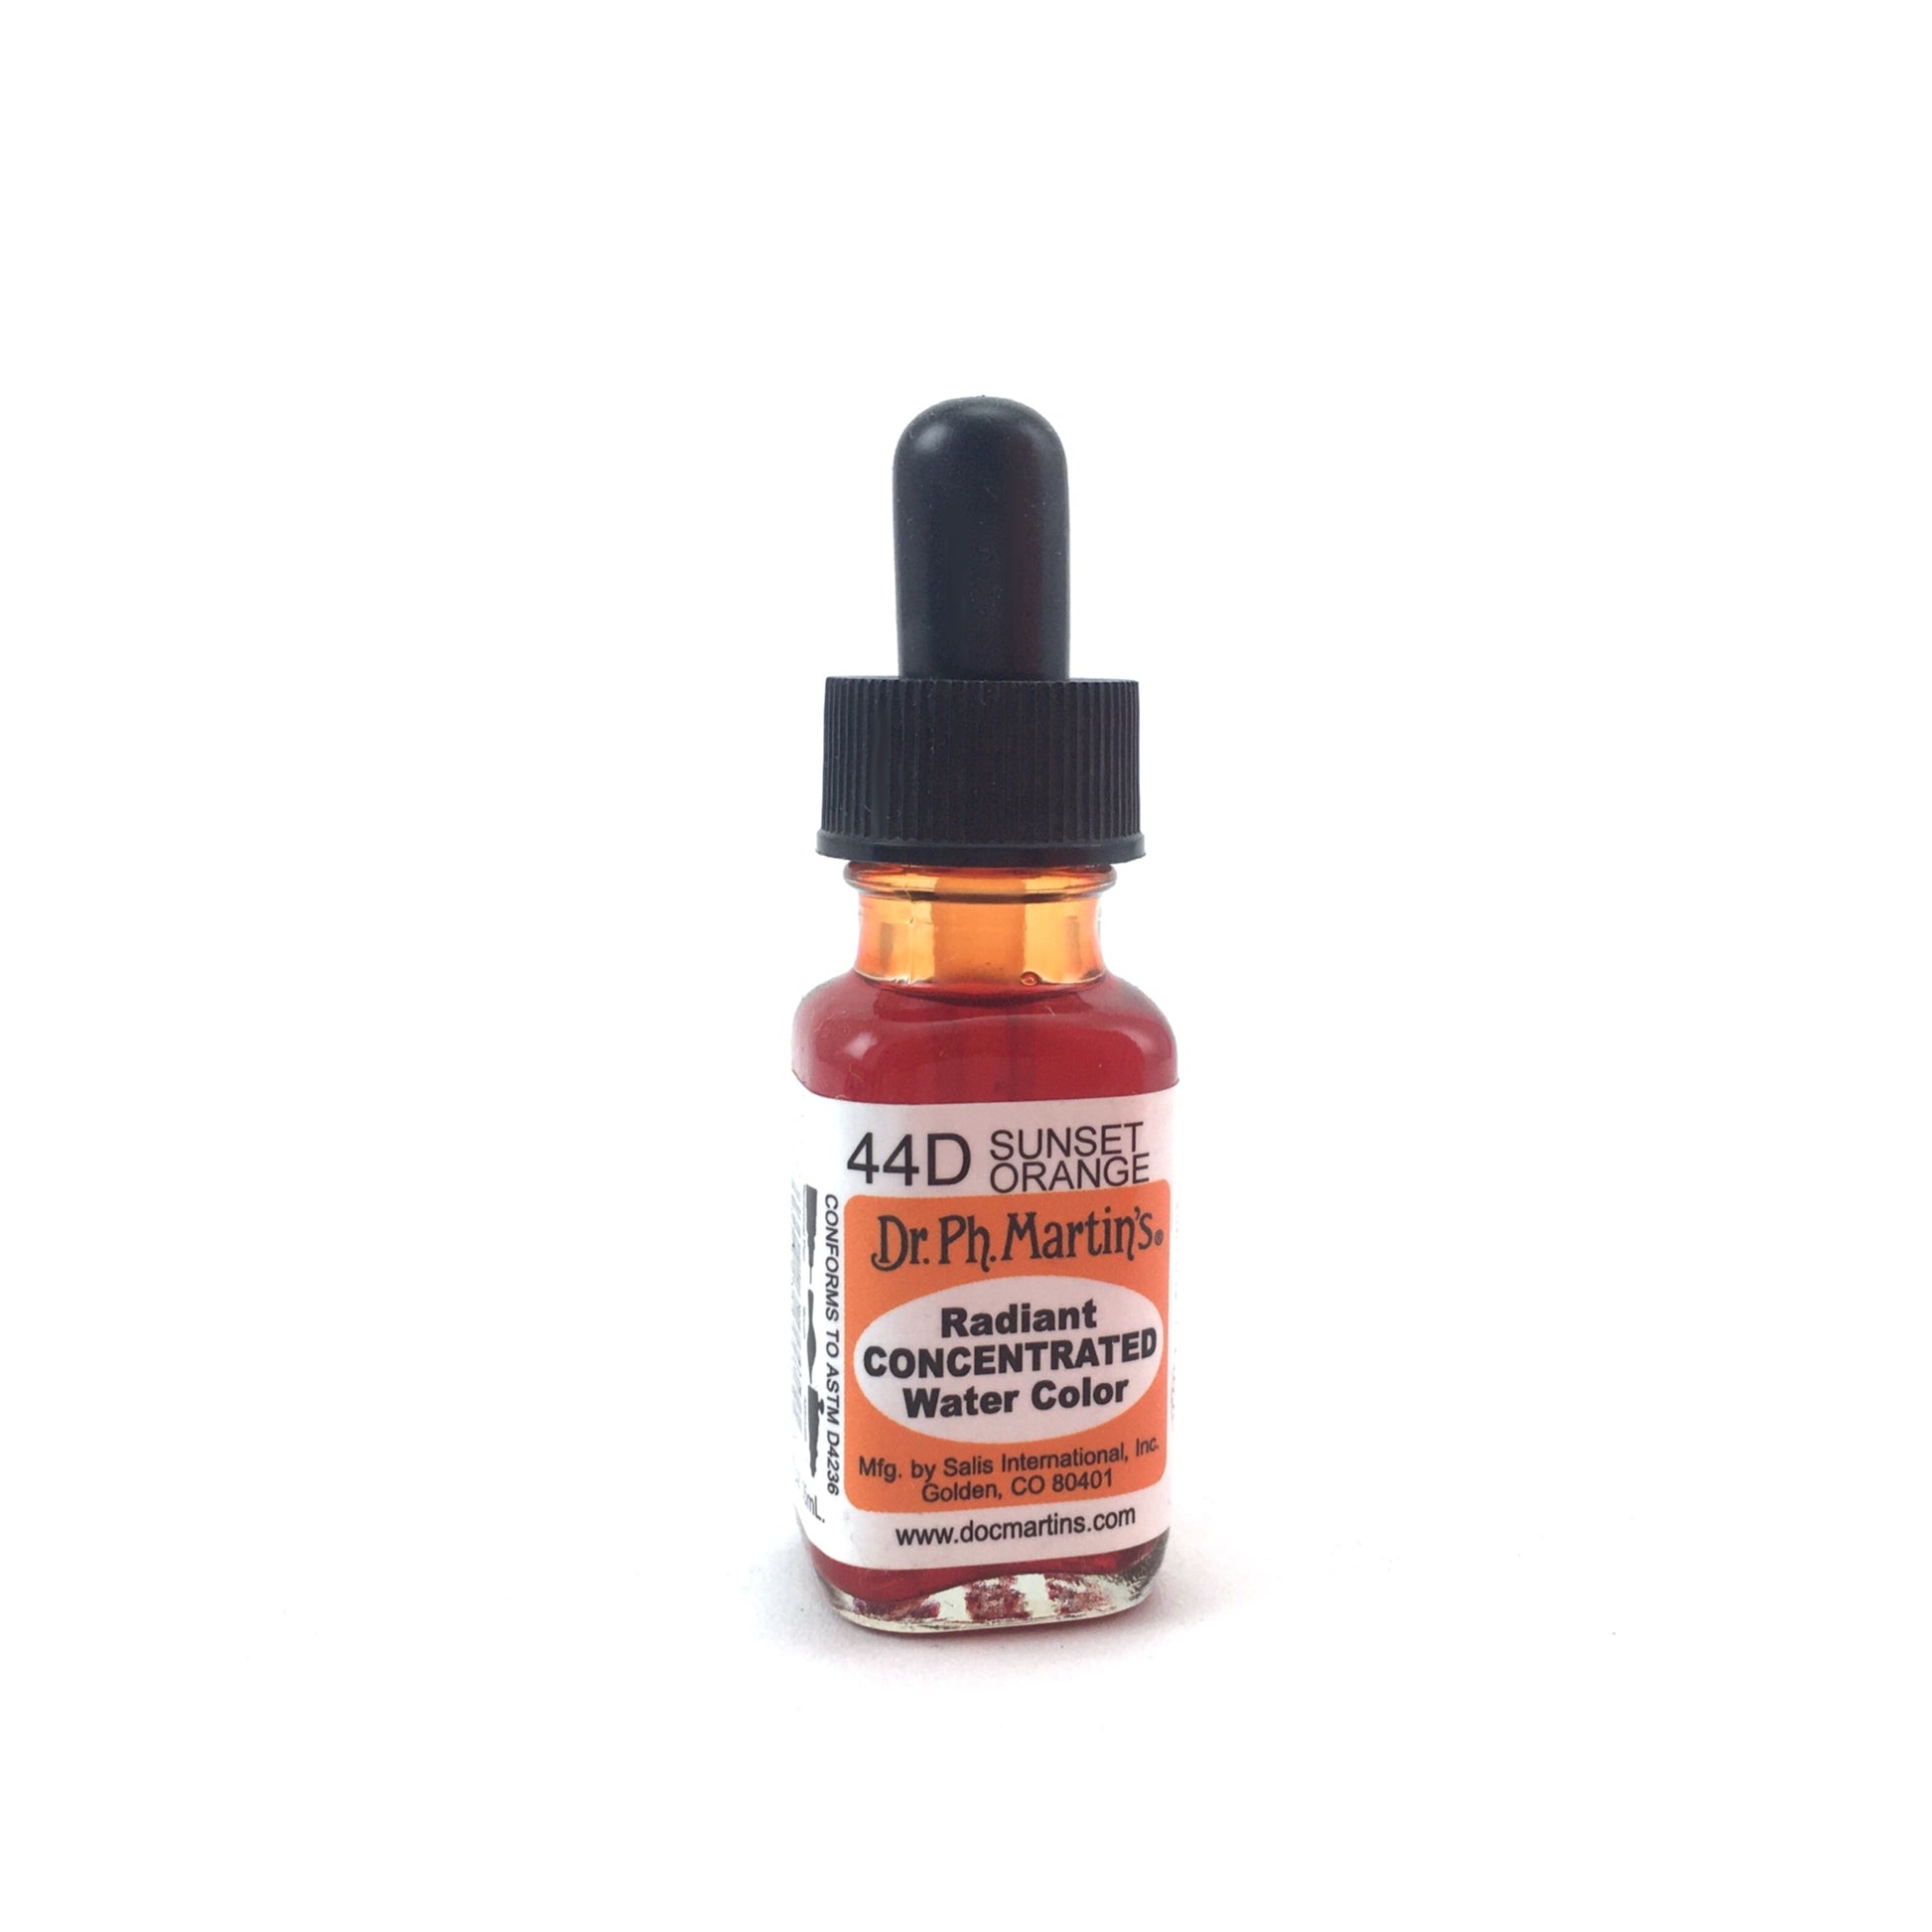 Dr. Ph. Martin's Radiant Concentrated Watercolor - .50 oz. - 44D - Sunset Orange by Dr. Ph. Martin’s - K. A. Artist Shop